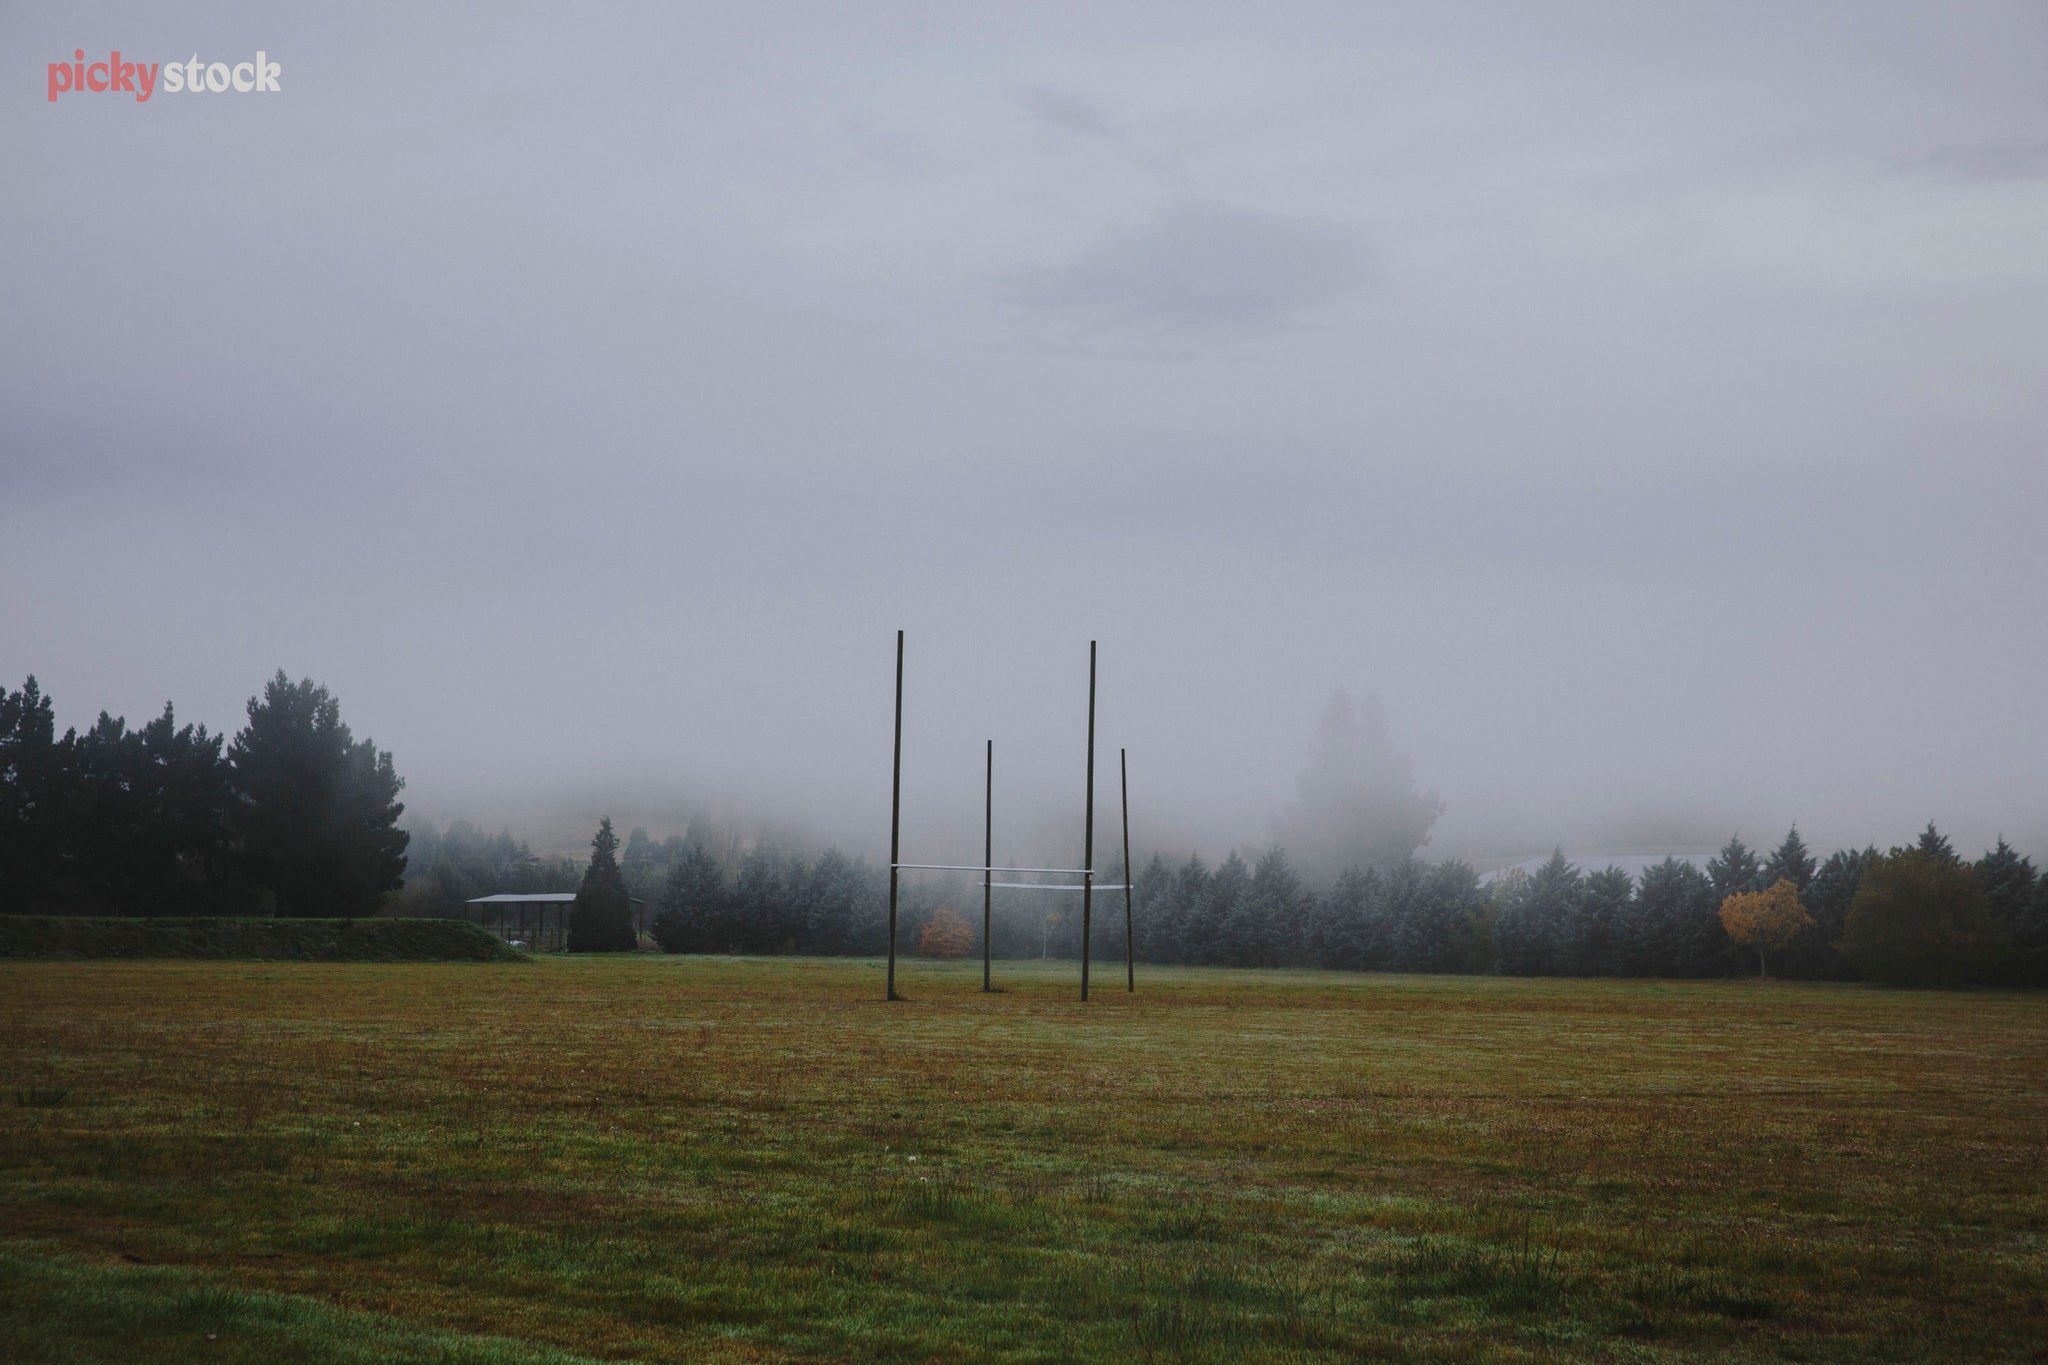 Moody rural rugby field on a grey day. There are no players just the pitch and goal posts.